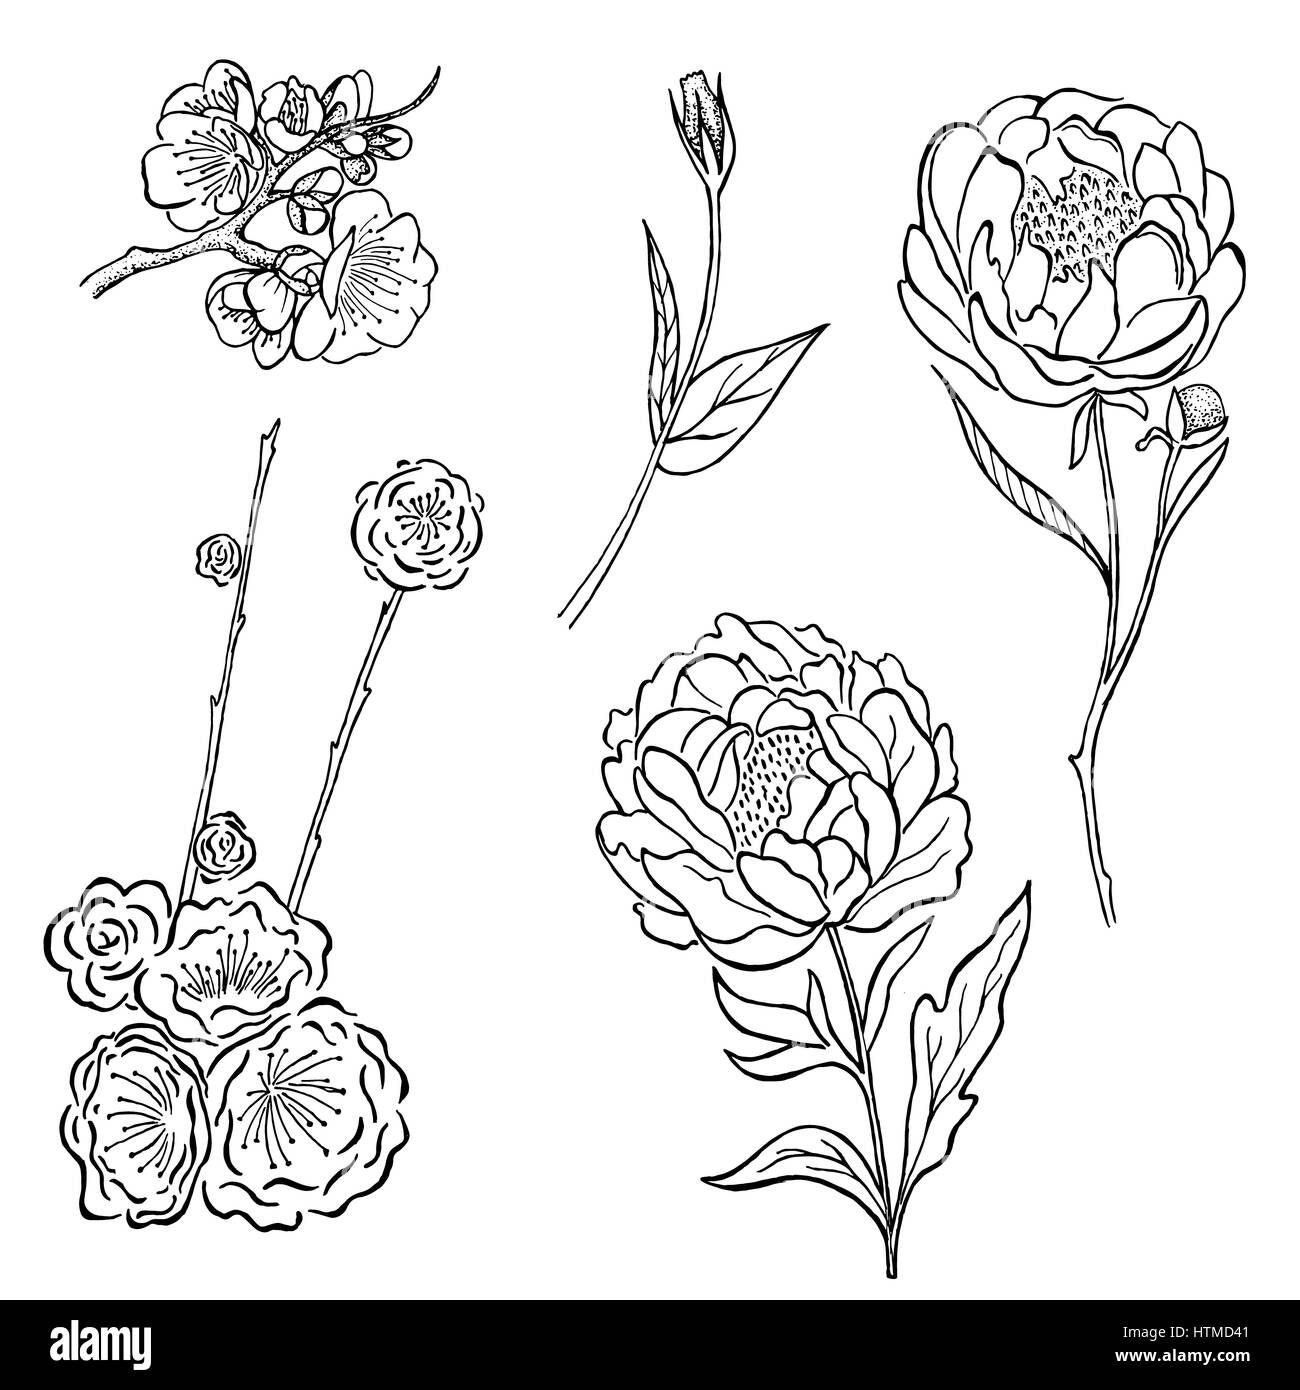 Vector collection of hand drawn peony and rose flowers and leaves isolate on white background Stock Photo